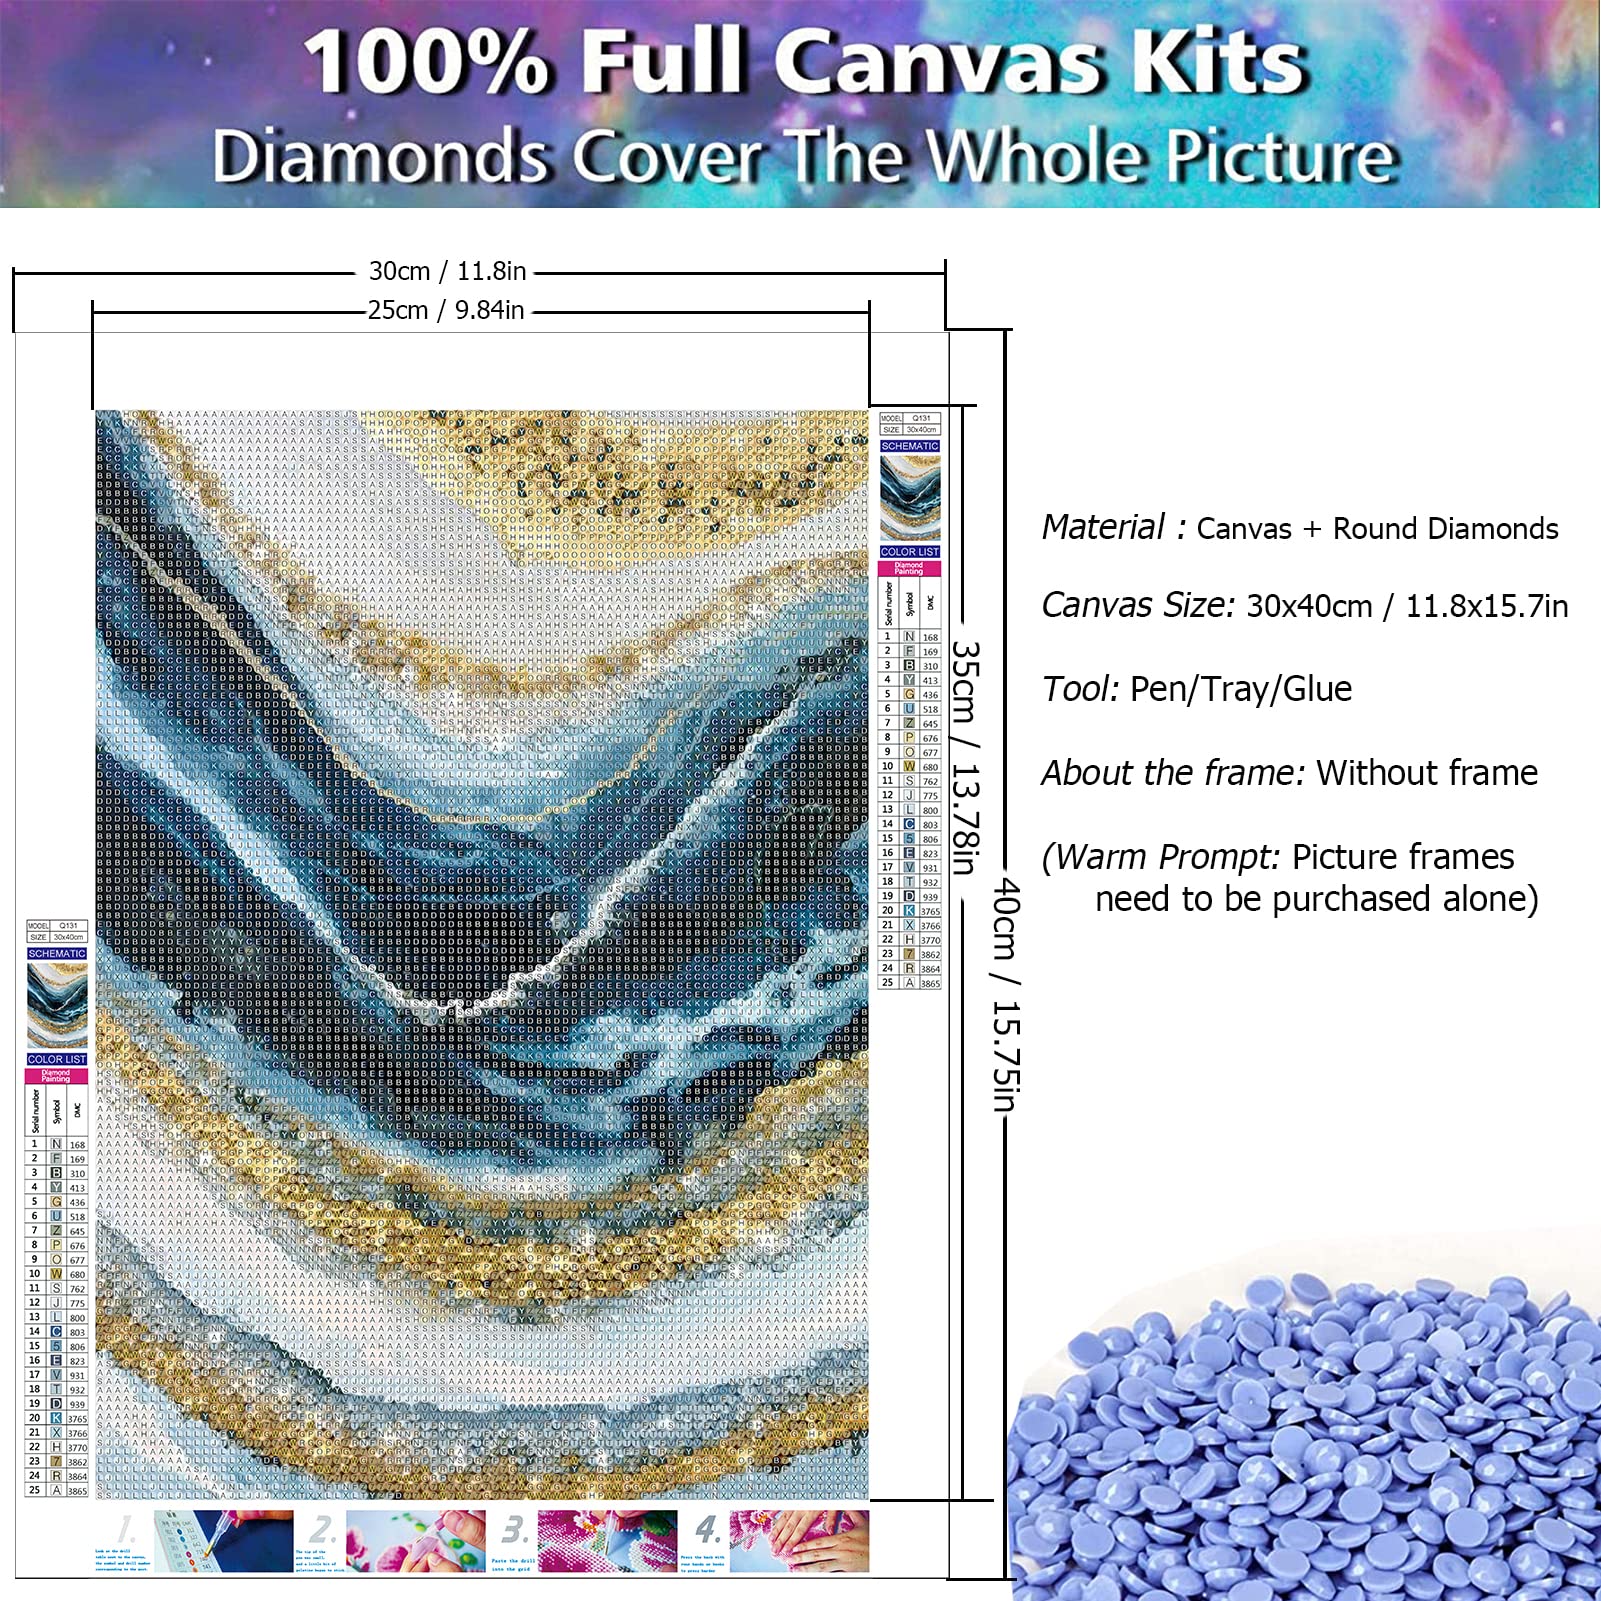 JATOK Abstract 5D Diamond Painting Kits for Adults Landscape Wave Paint with Diamonds Full Round Embroidery Pictures Arts Kits Diamond Art Kits for Home Wall Decor 11.8x15.7in